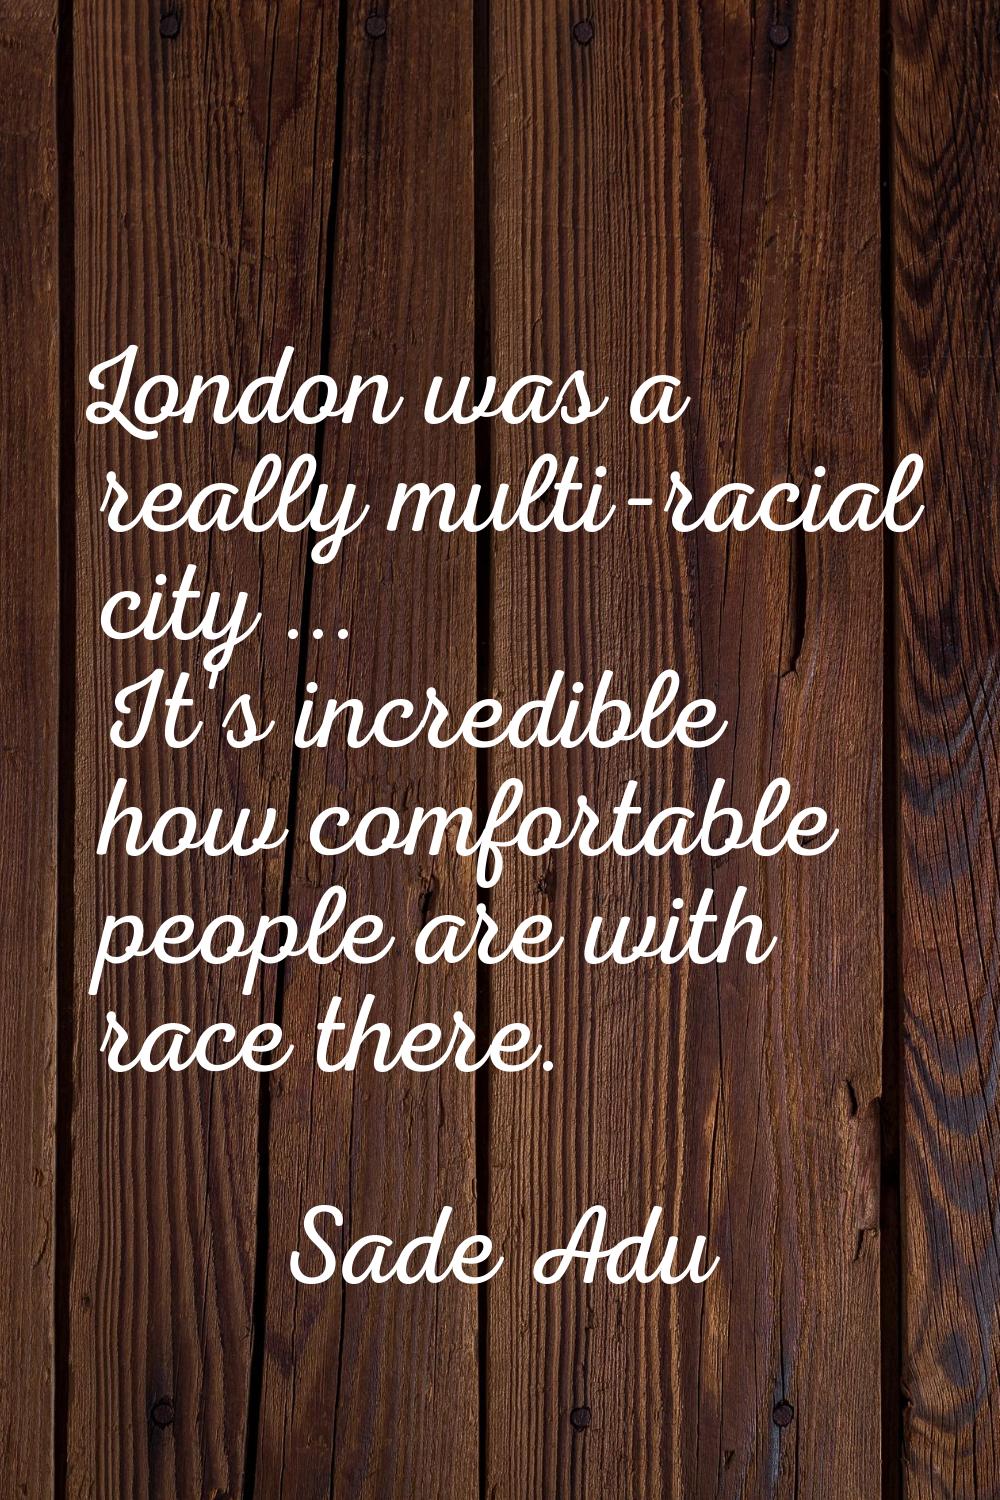 London was a really multi-racial city ... It's incredible how comfortable people are with race ther